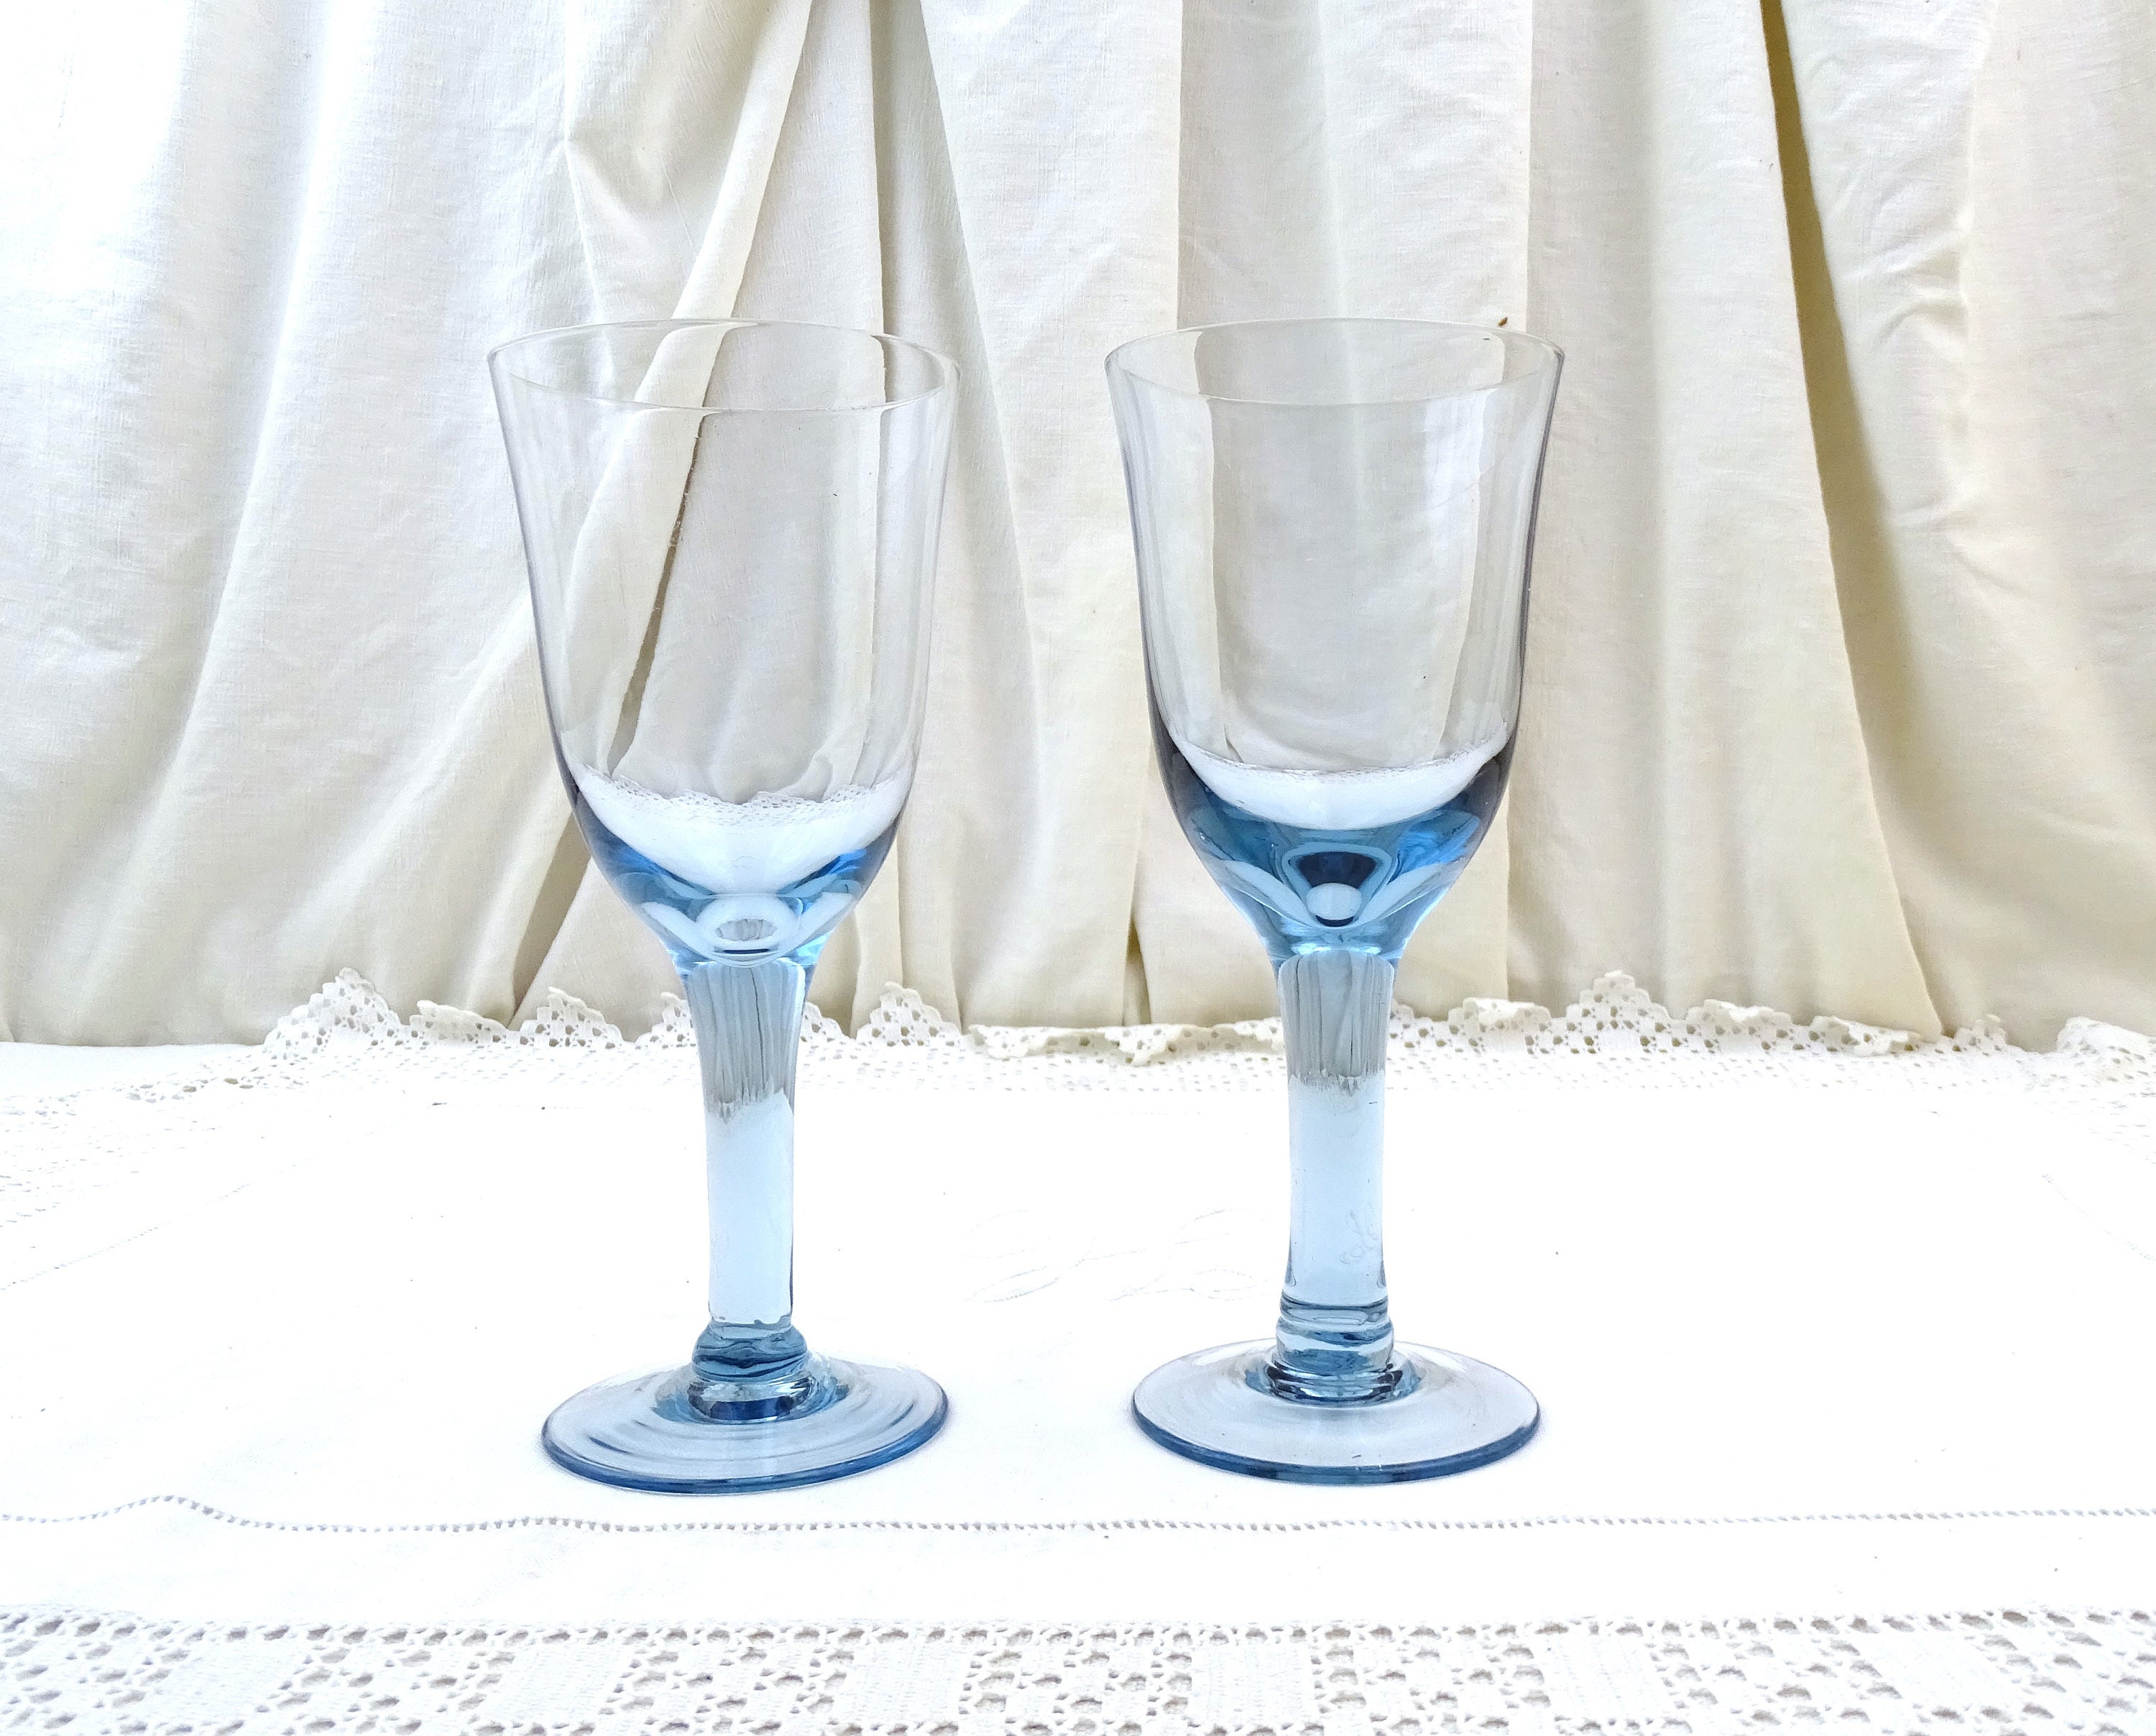 2 Large Vintage French Blue Blown Glass Stem Wine Glasses, Tall Retro Hand  Crafted Glassware Goblets from France, Big Drinking Glasses